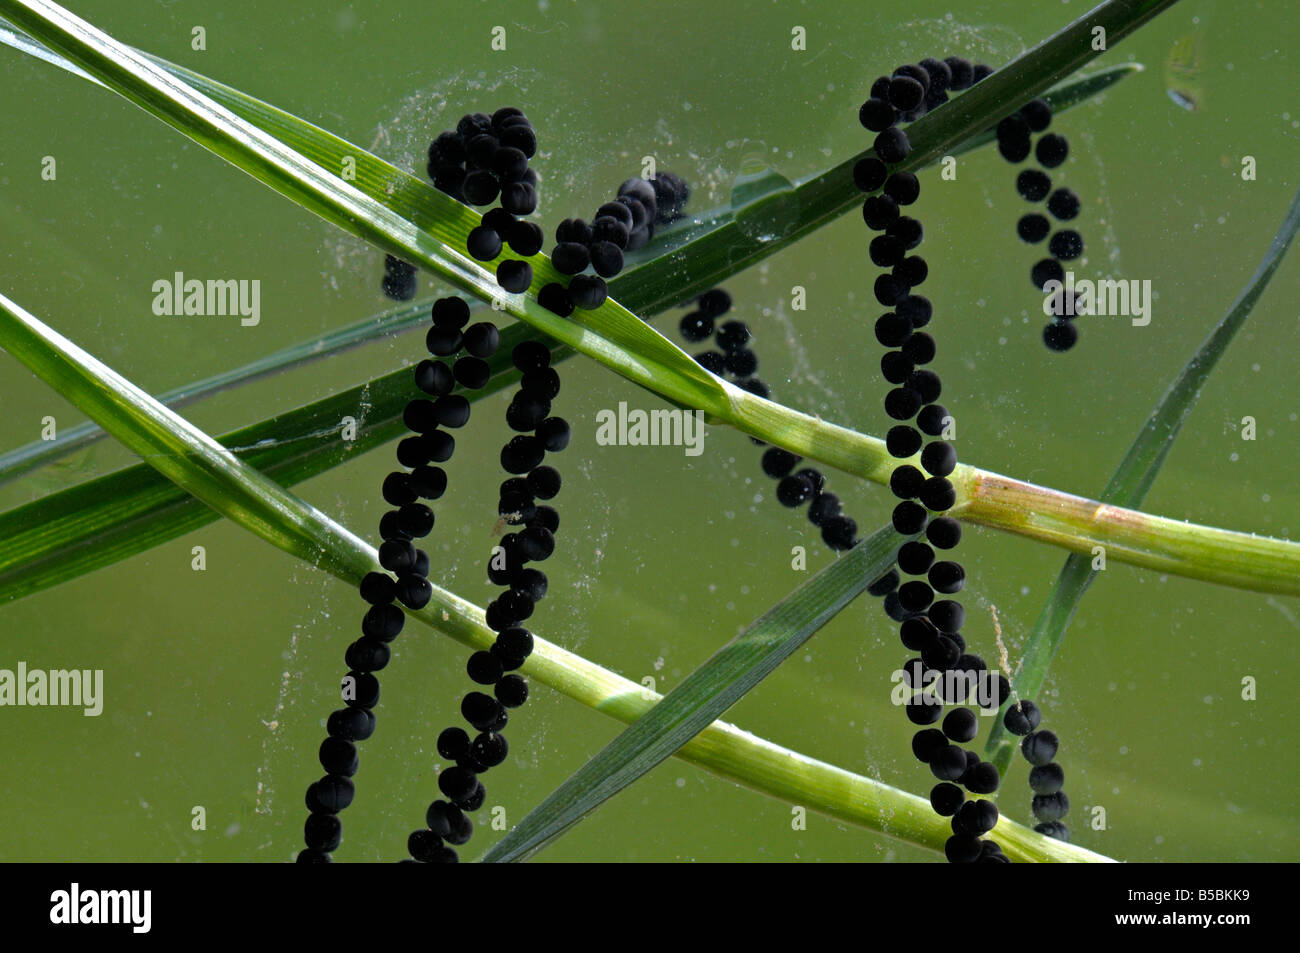 European Toad Common Toad (Bufo bufo) egg strings on grass Stock Photo